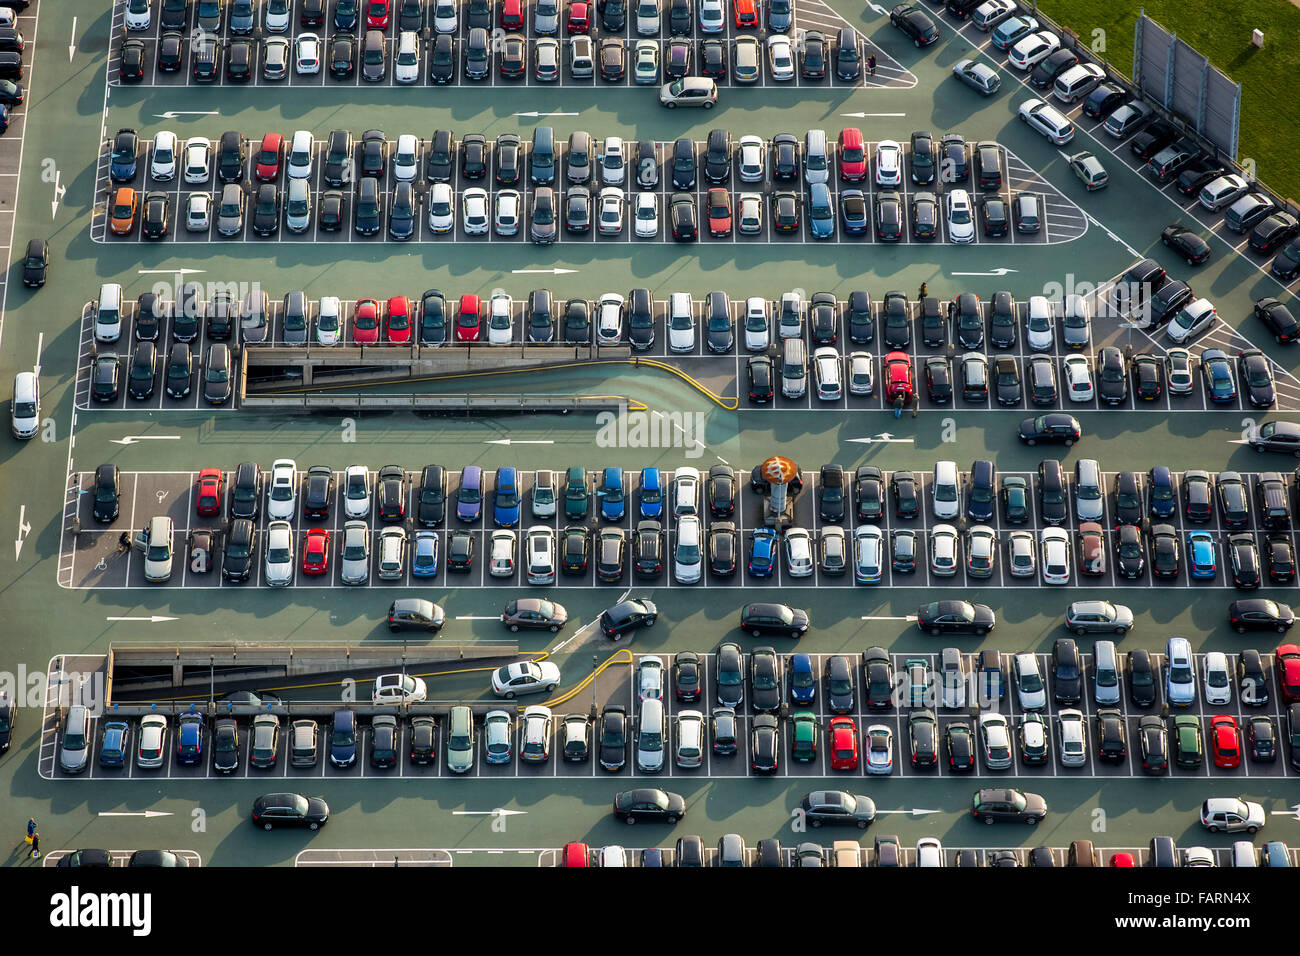 Aerial view, parking, car parks, shopping mall CentrO Oberhausen, shopping mall, largest shopping and leisure center in Europe, Stock Photo